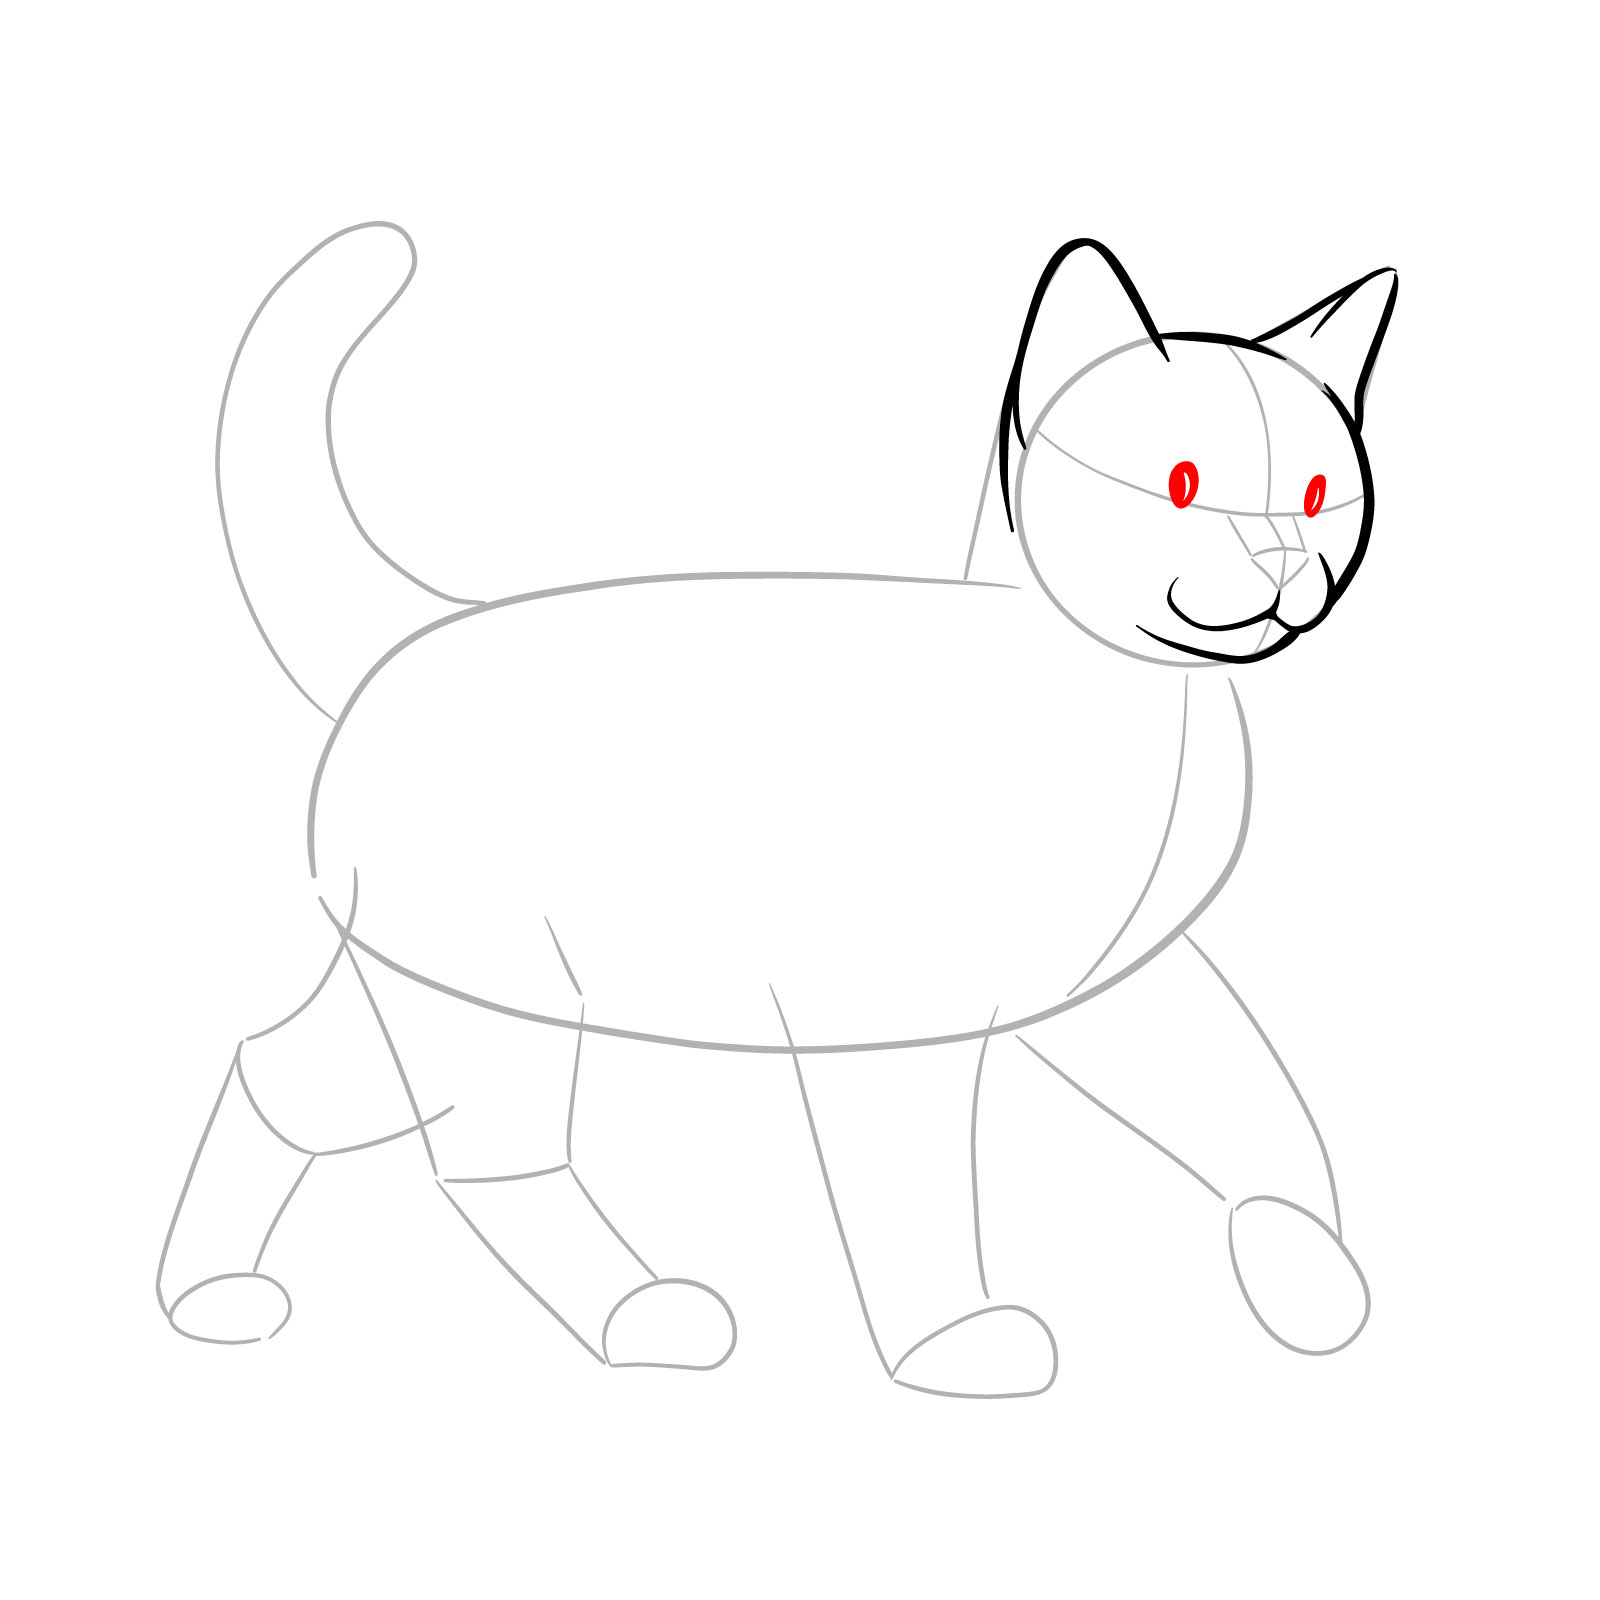 Adding pupils to the cat's eyes in a walking cat sketch - step 05